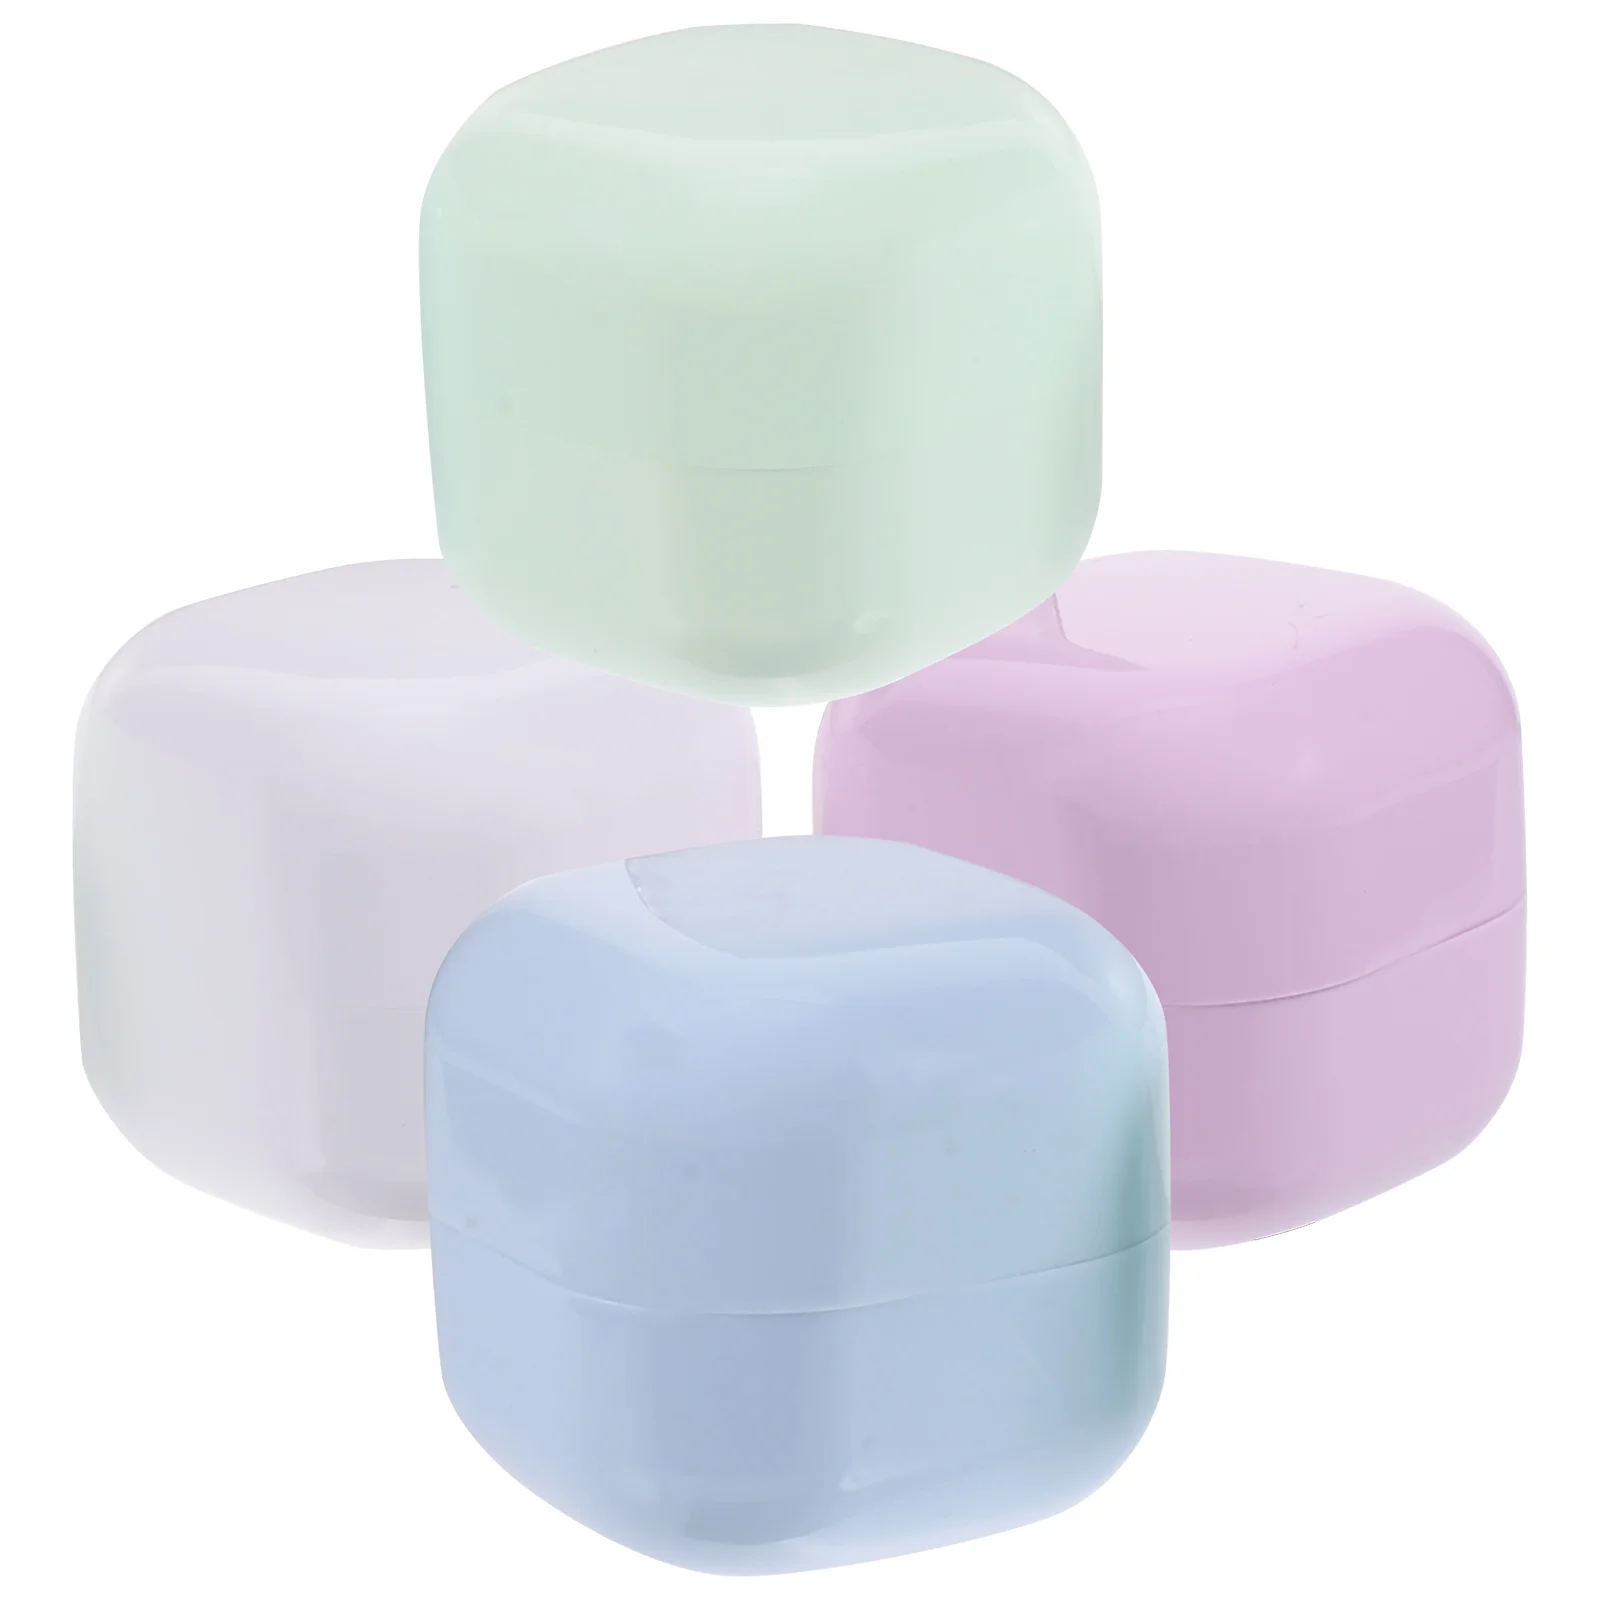 

4 Pcs Refillable Cream Bottle Cosmetics Body Butter Jars Hair Conditioner Packing Box Face Container Travel